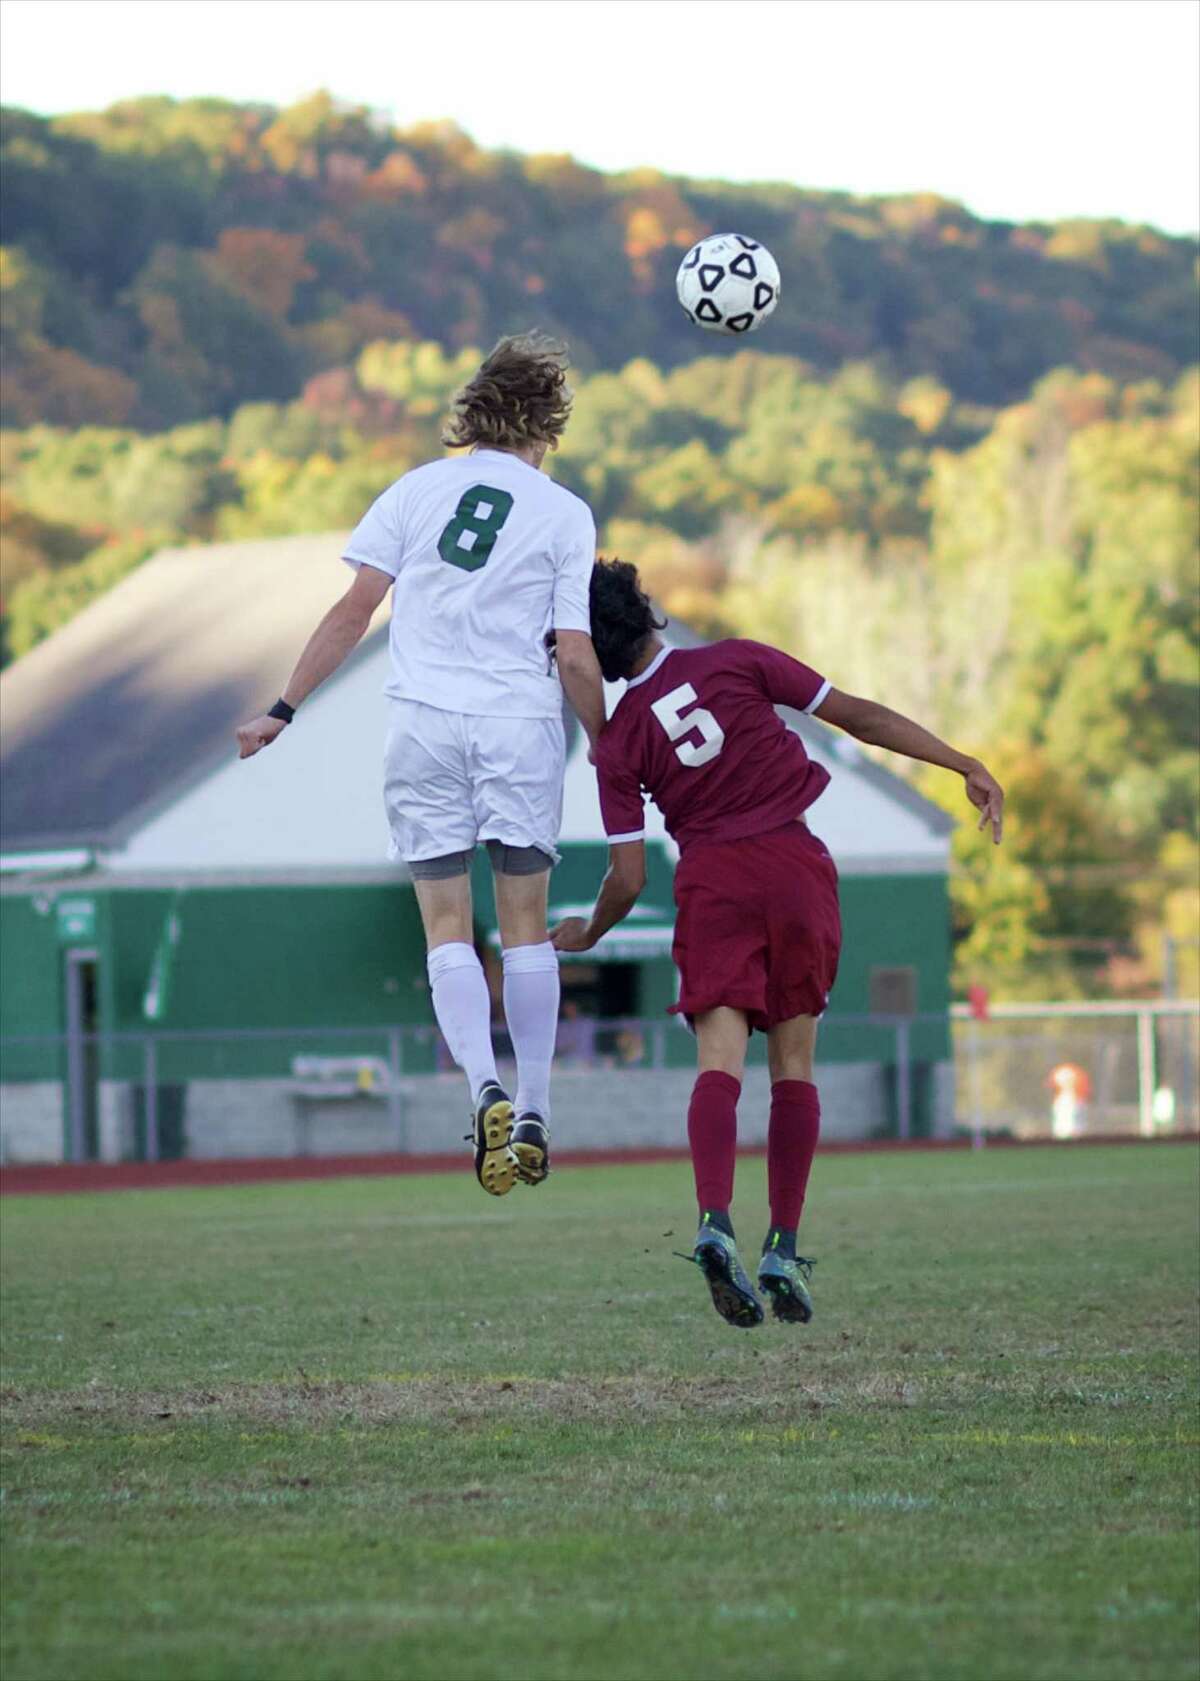 New Milford’s Cooper Knight (8) and Bethel’s Sergio Zapata (5) battle for position during their boys soccer game at New Milford High School on Thursday, October 15th, 2015.